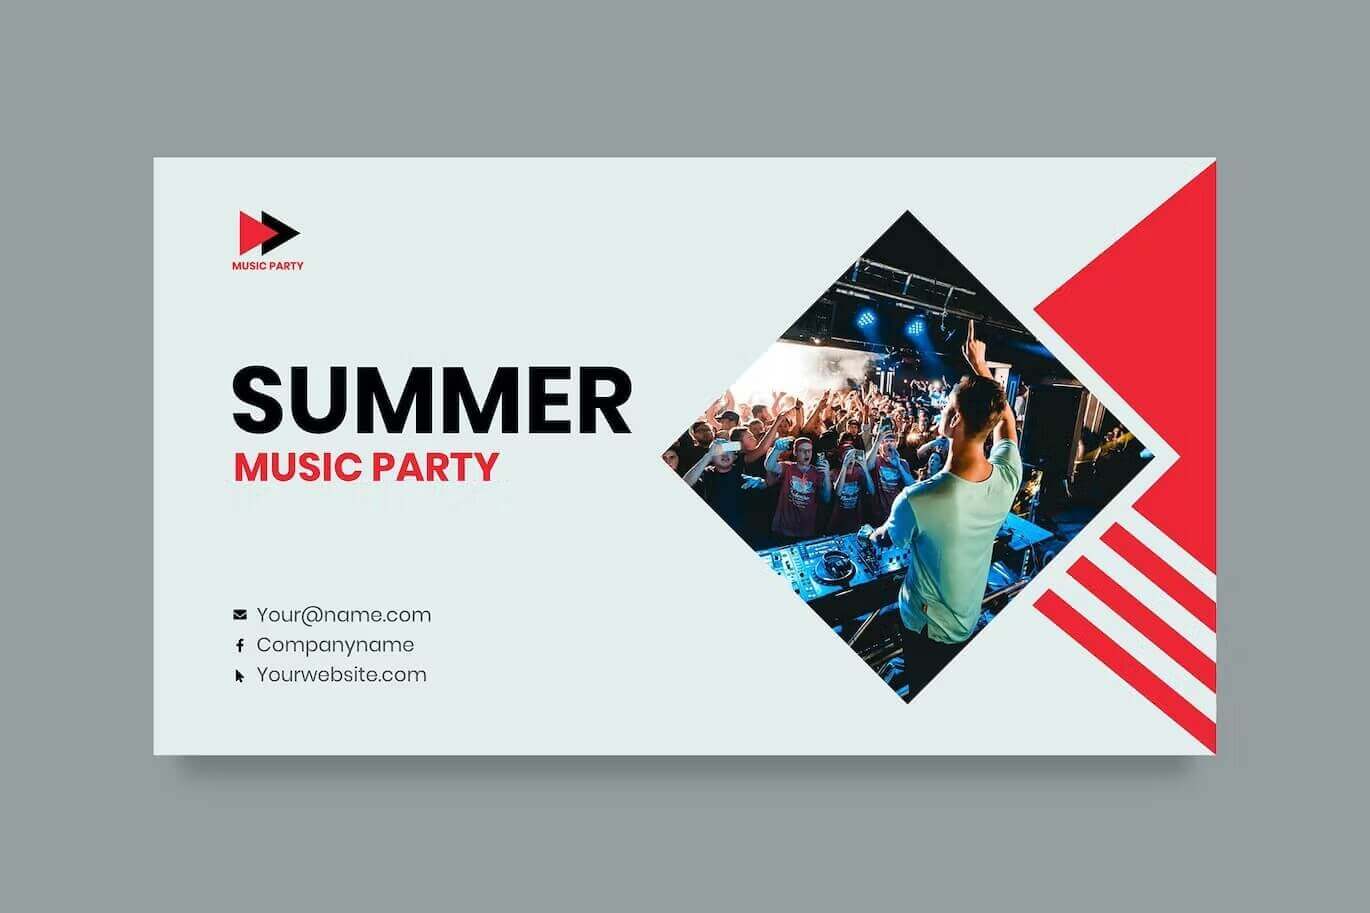 Summer music party on the white background.